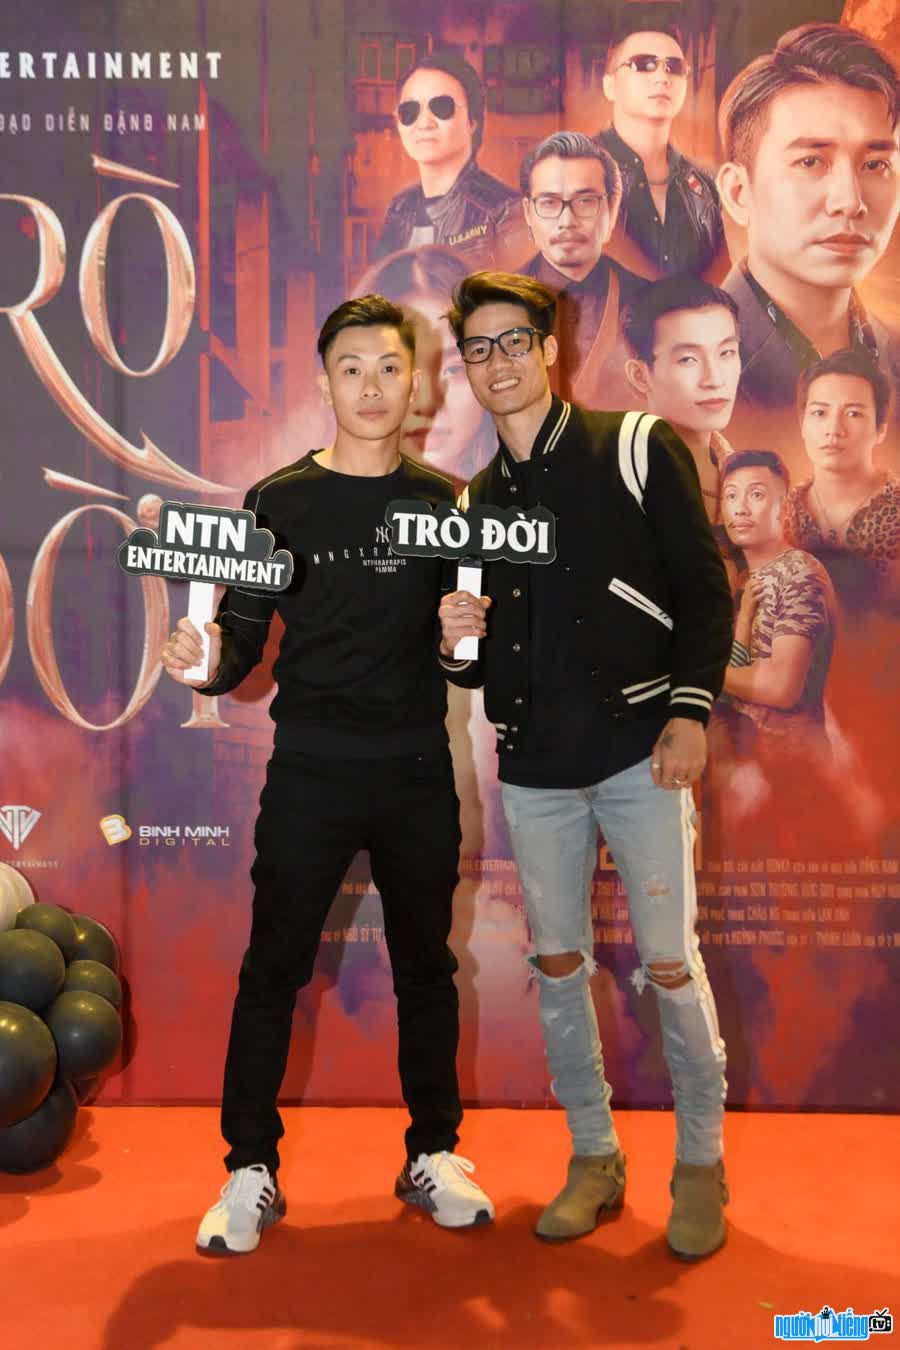 Director Dang Nam is the director of many million-view web dramas